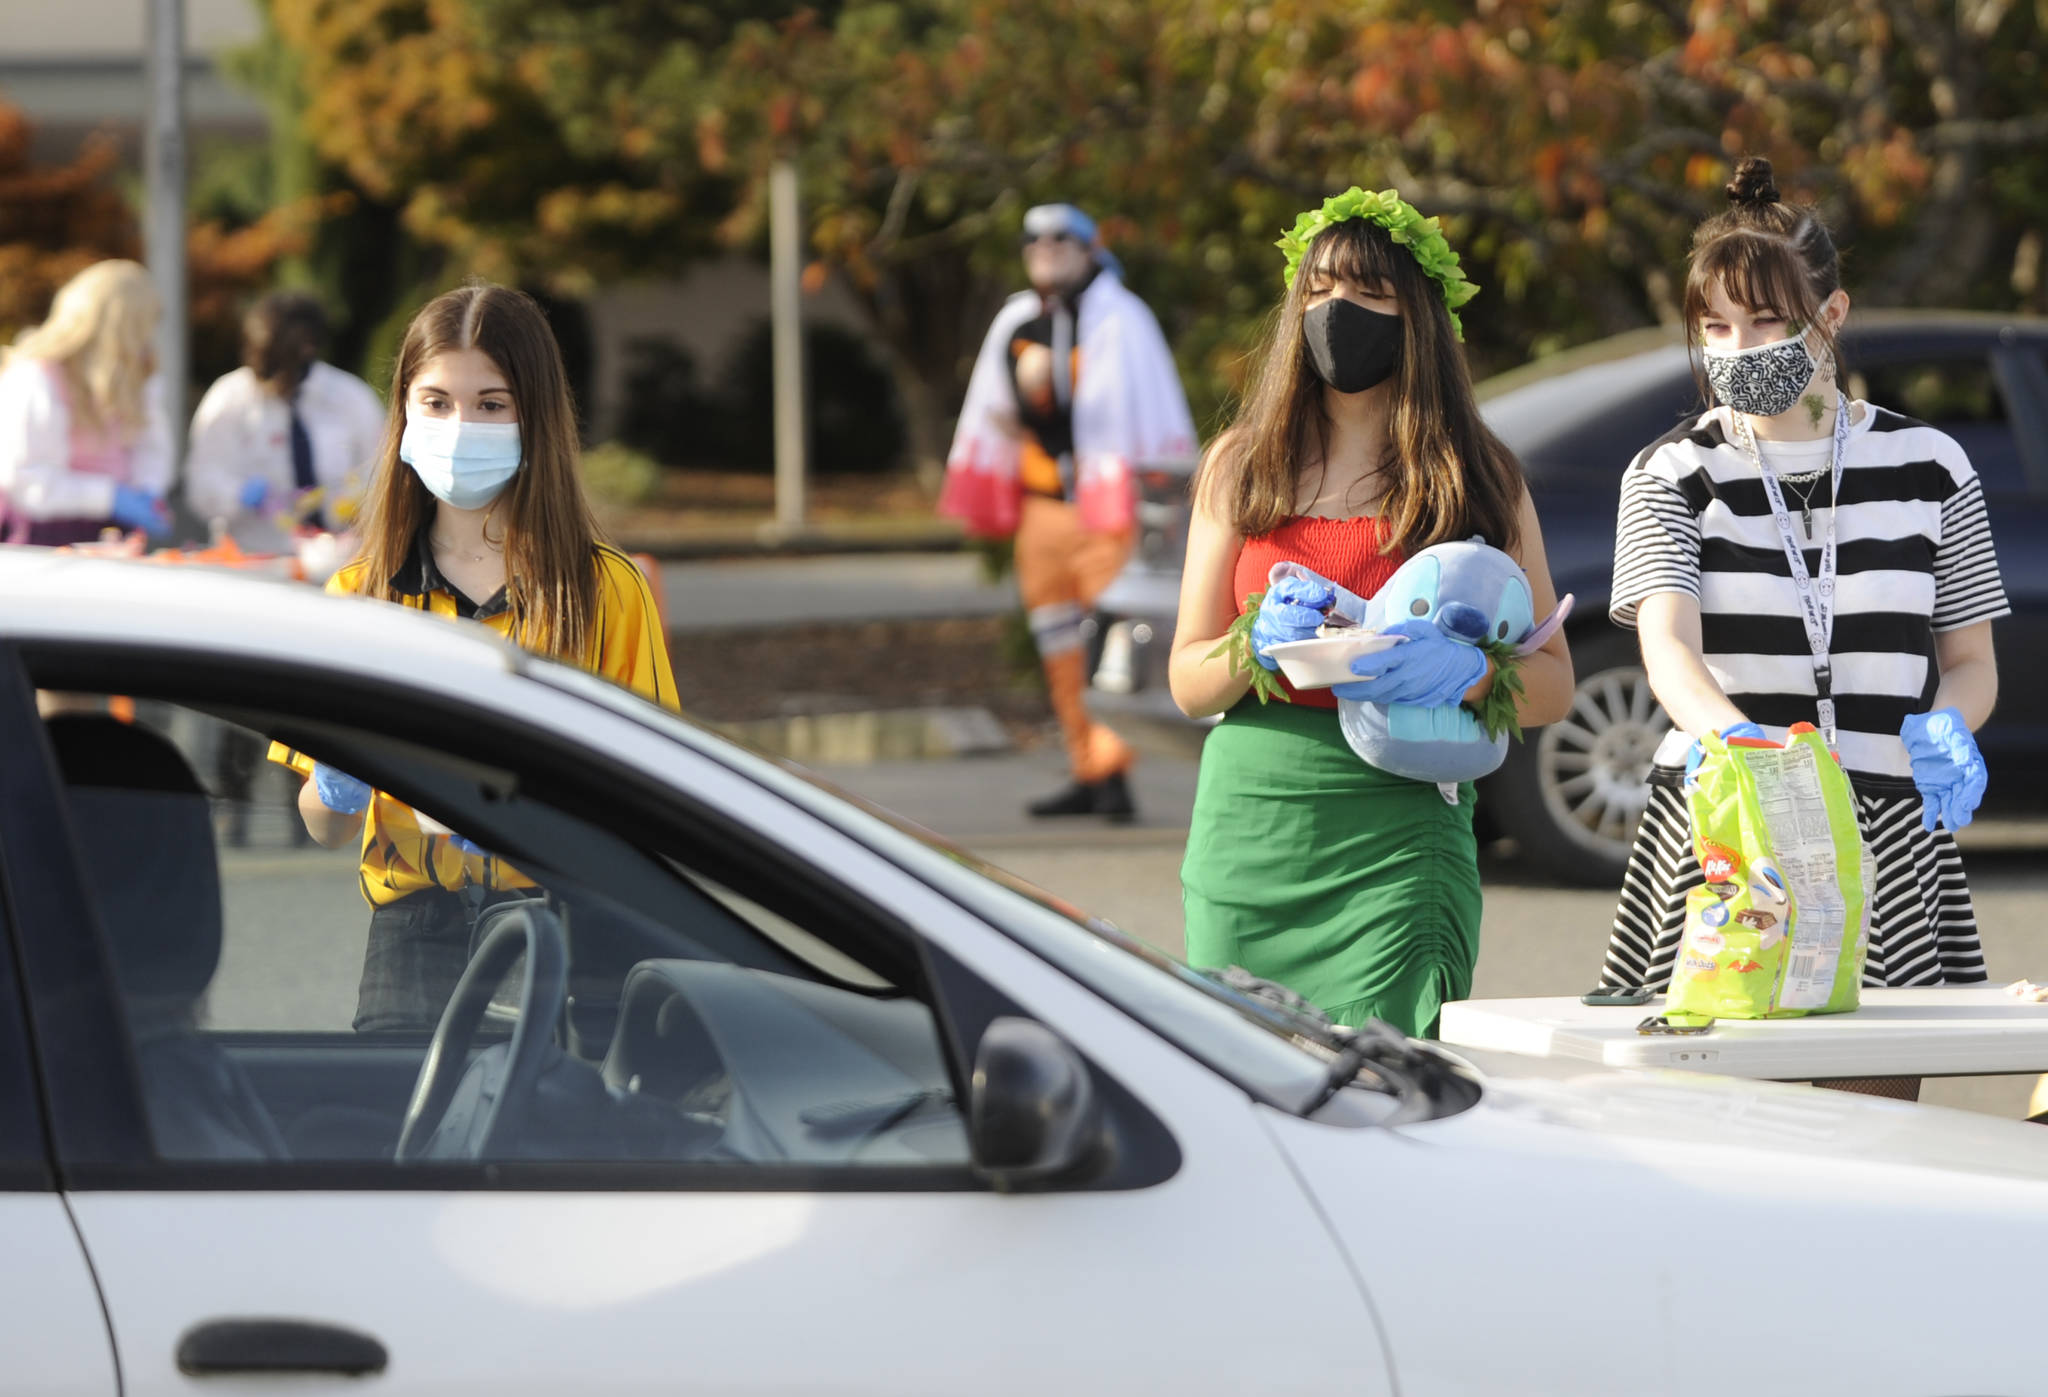 From left, Sequim High School students Alliyah Weber, Christina Caples and Delaney Nucci hand out candy at SHS’s drive-thru Halloween event on Oct. 31.